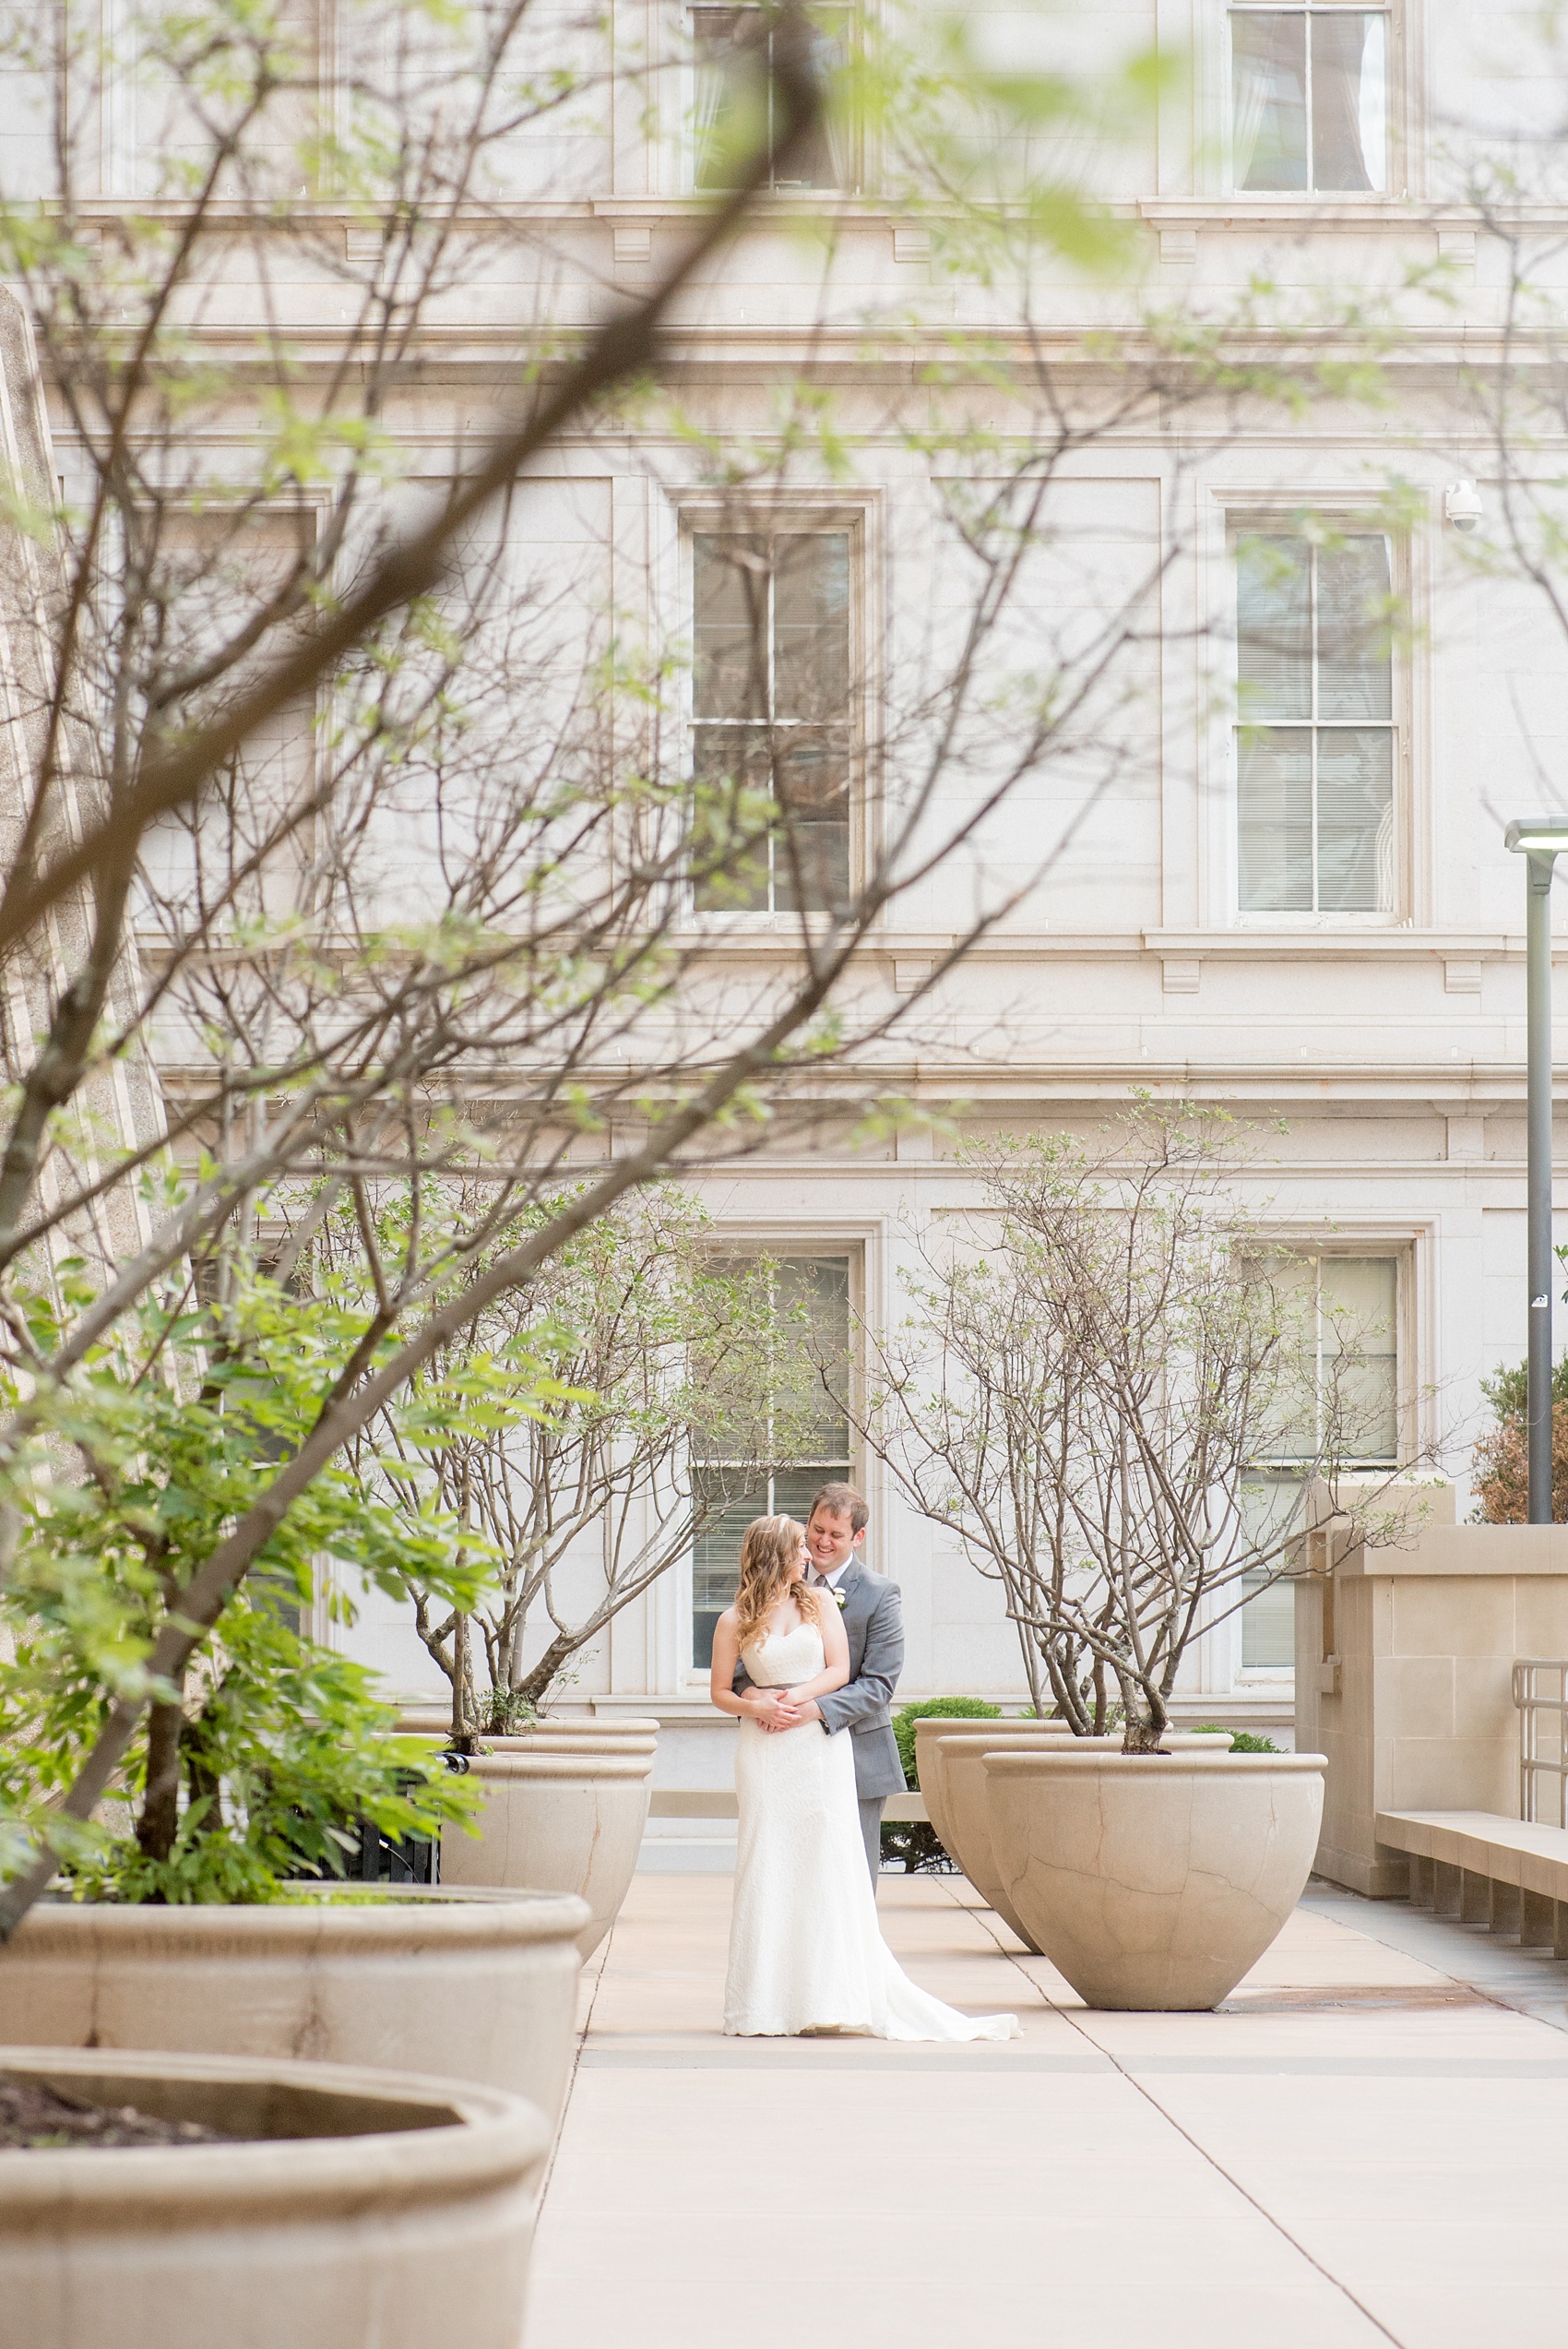 Mikkel Paige Photography photos from a fall wedding at The Stockroom at 230. A picture of the bride and groom in downtown Raleigh with columns and iconic architecture.